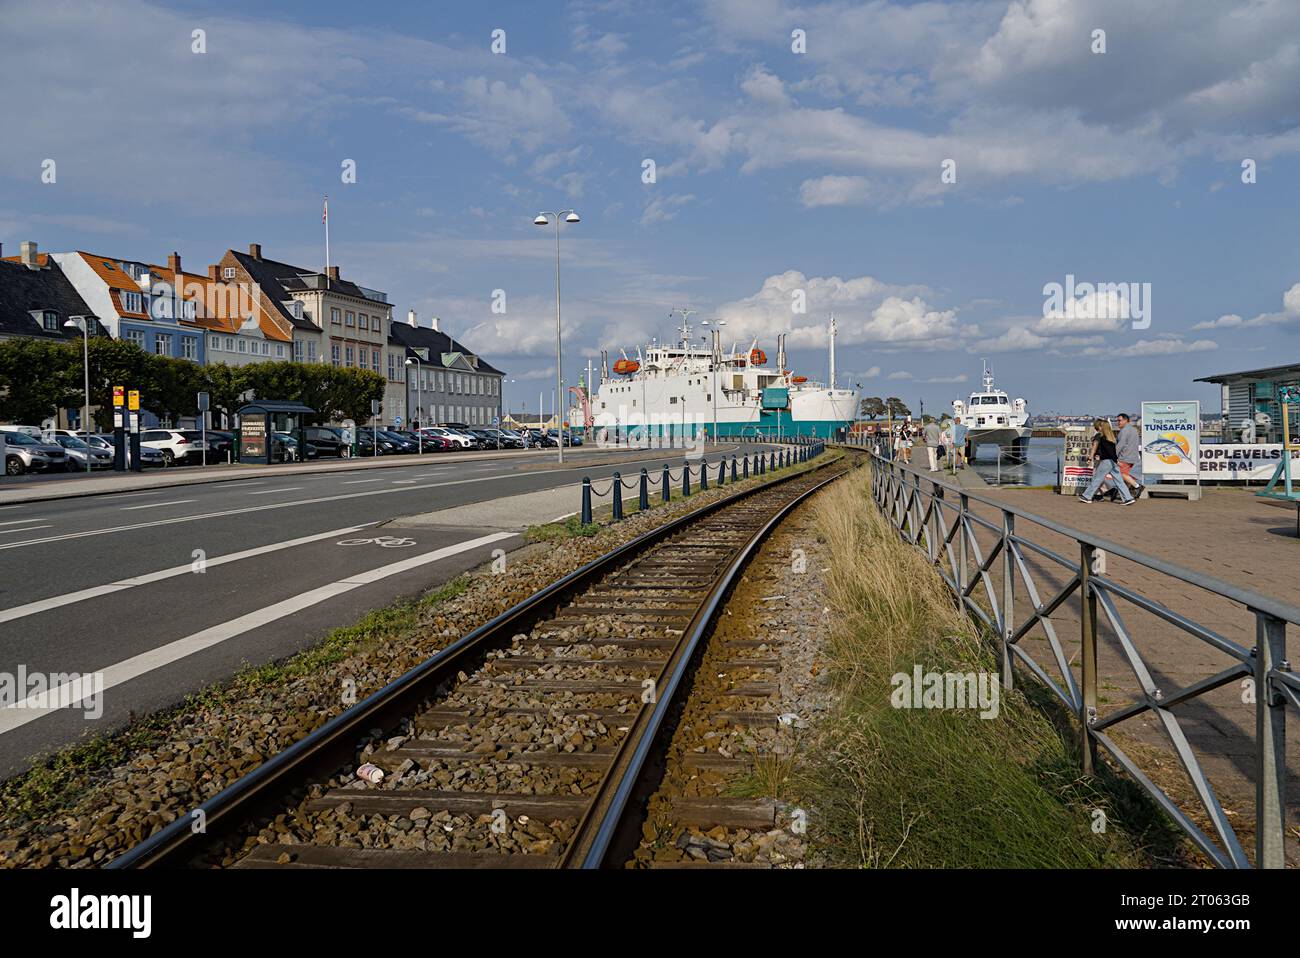 Paved road and train tracks leads to the ship docked at the harbor. Stock Photo